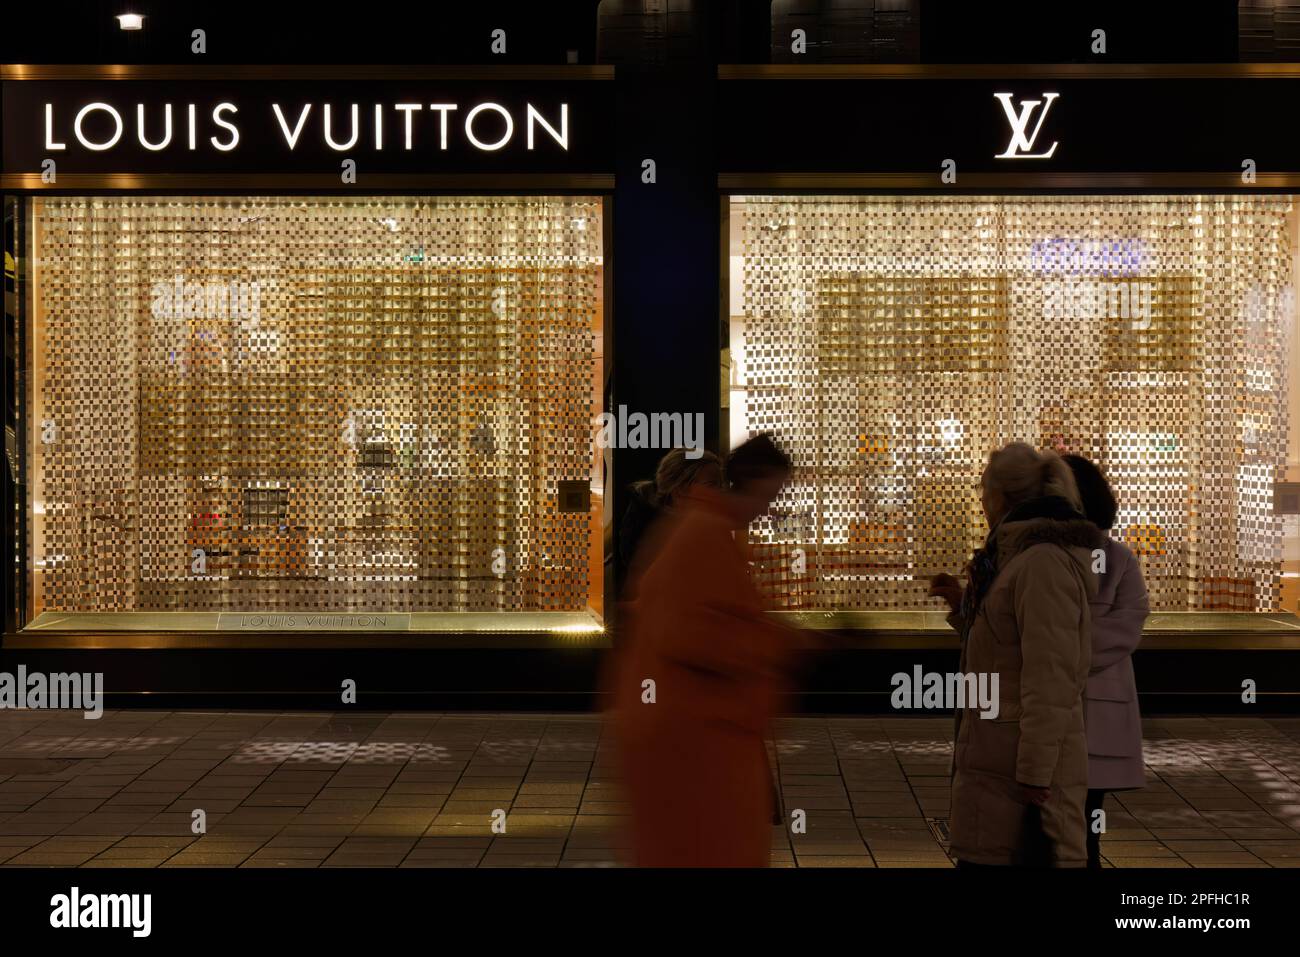 VIENNA, Austria - January 6, 2023: Louis Vuitton brand sign in a luxury shopping street in the city center Stock Photo